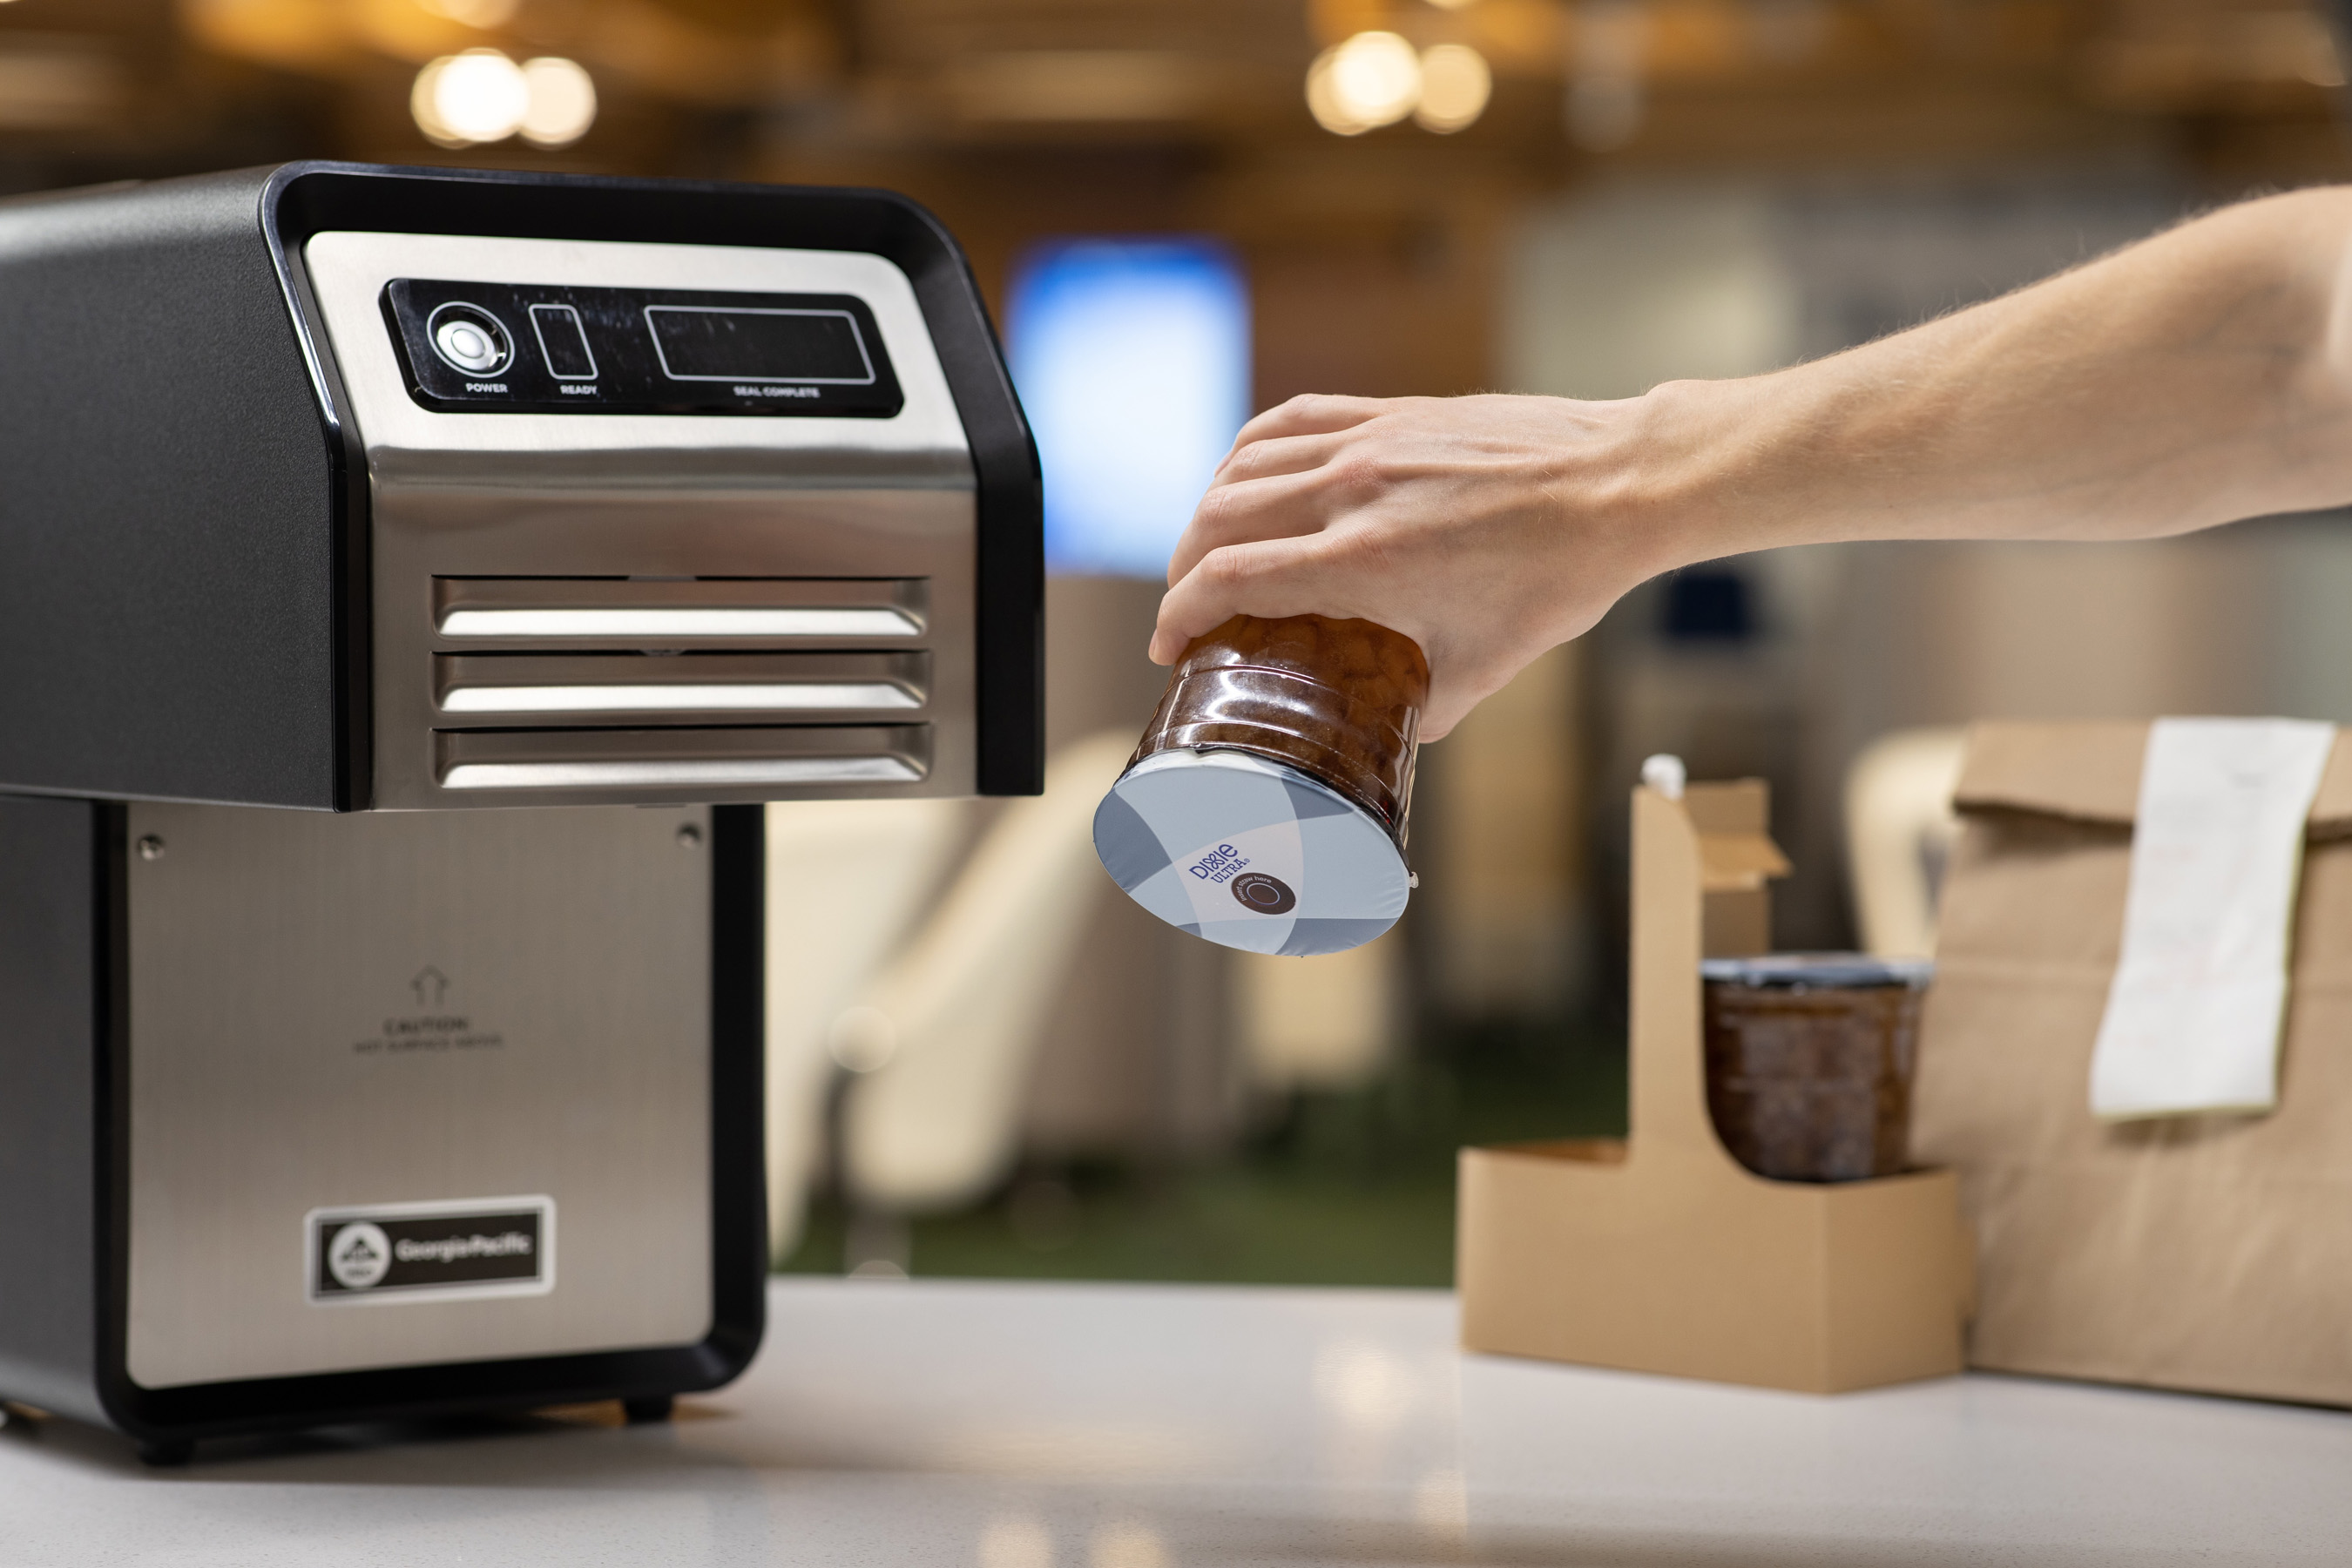 The GP PRO Automated Sealing Machine automatically applies a heat-activated film seal to beverage cups so customers can enjoy tamper-evident, spill-resistant drinks on-the-go.